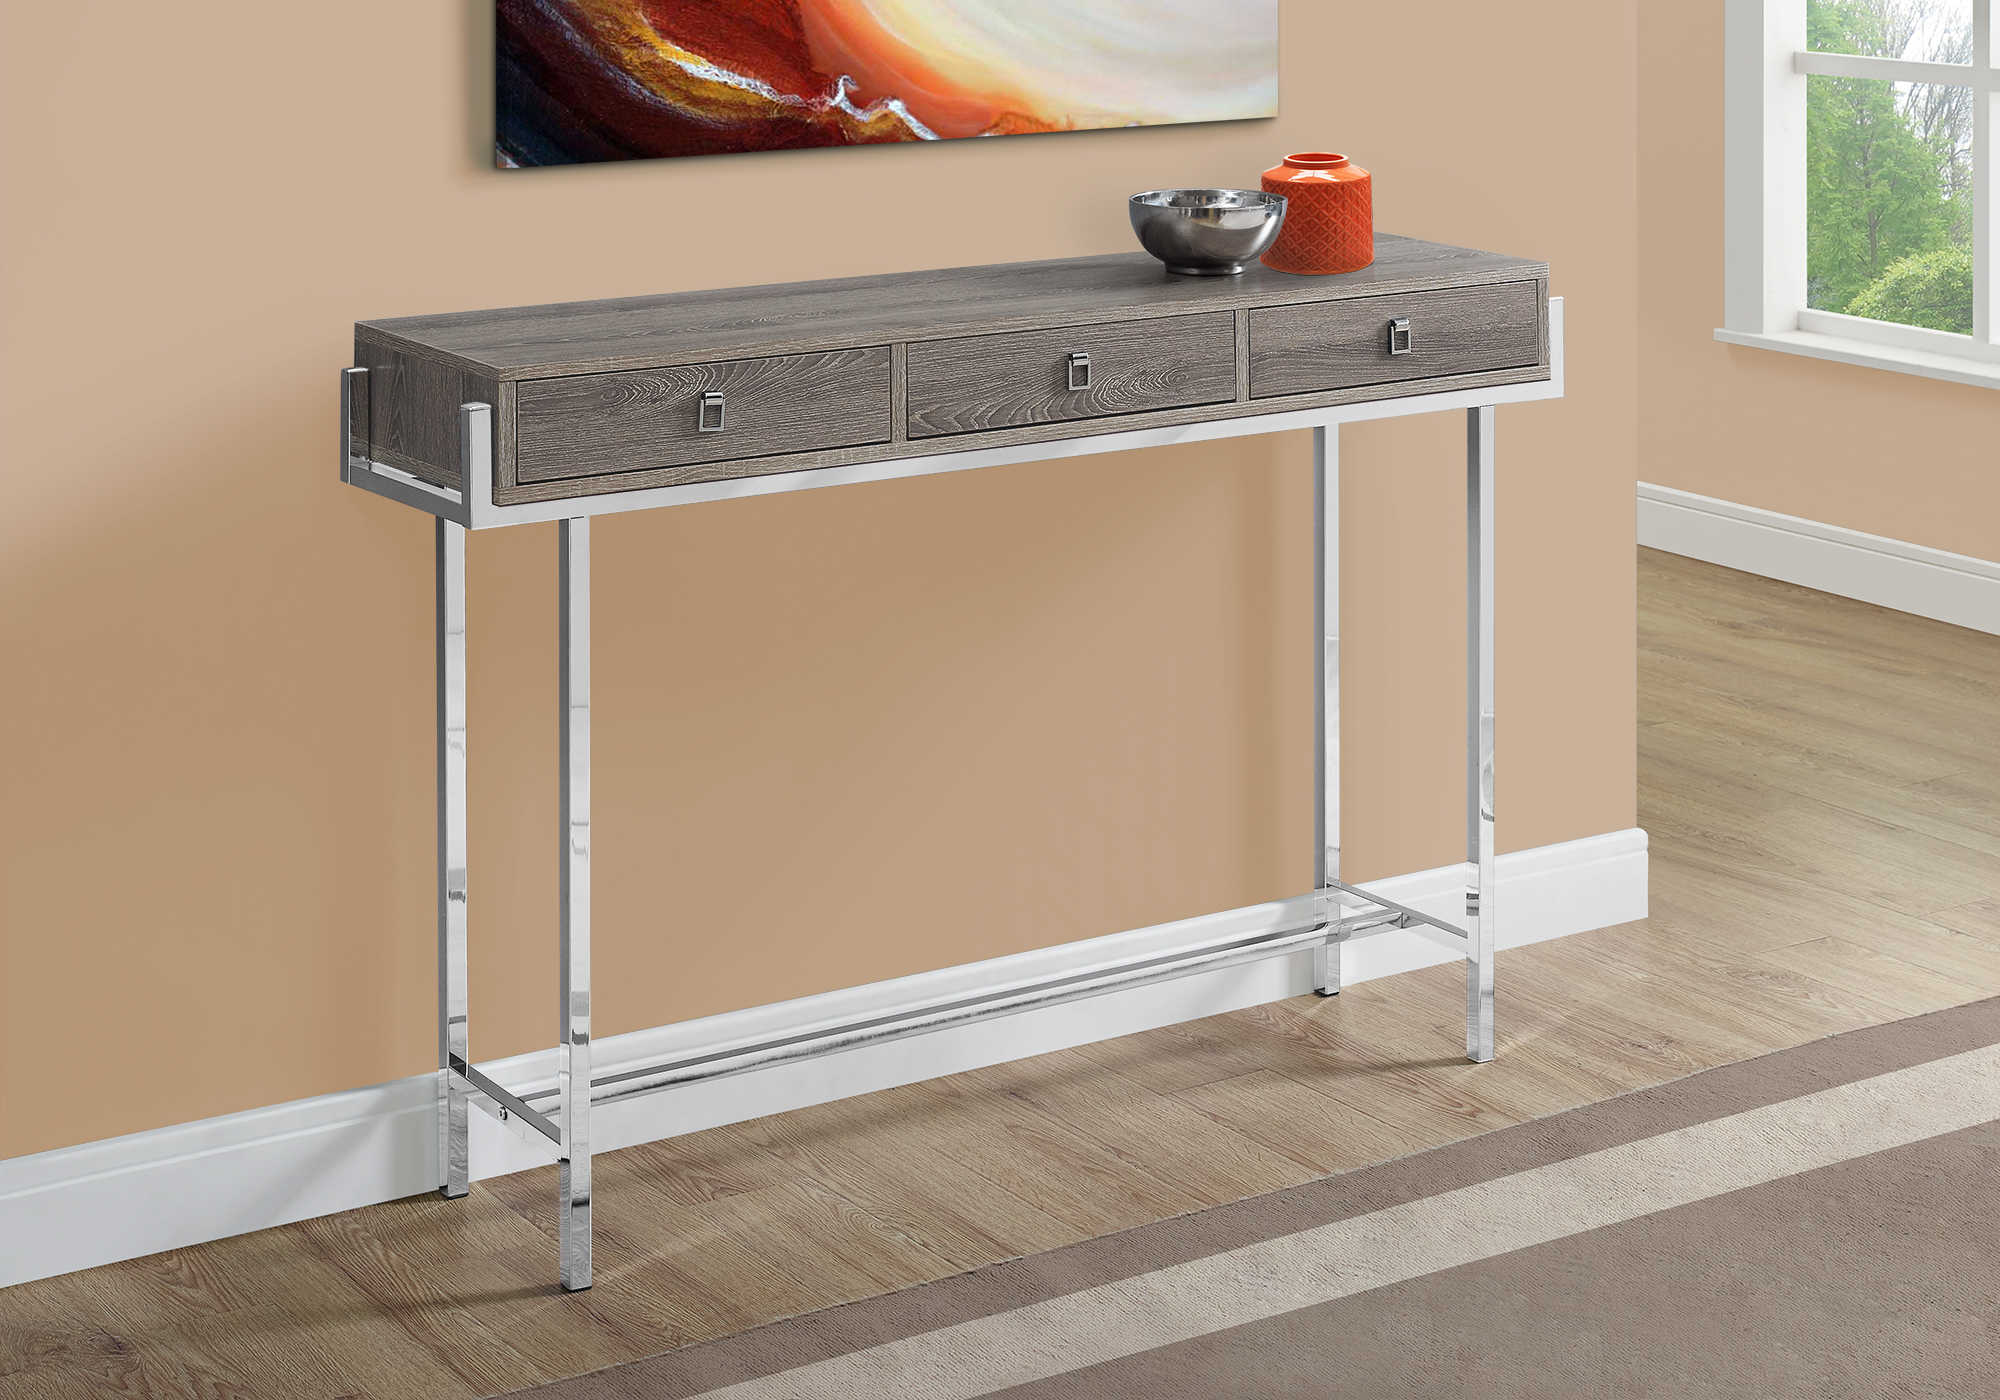 I 3299 - ACCENT TABLE - 48"L / DARK TAUPE / CHROME METAL BY MONARCH SPECIALTIES INC